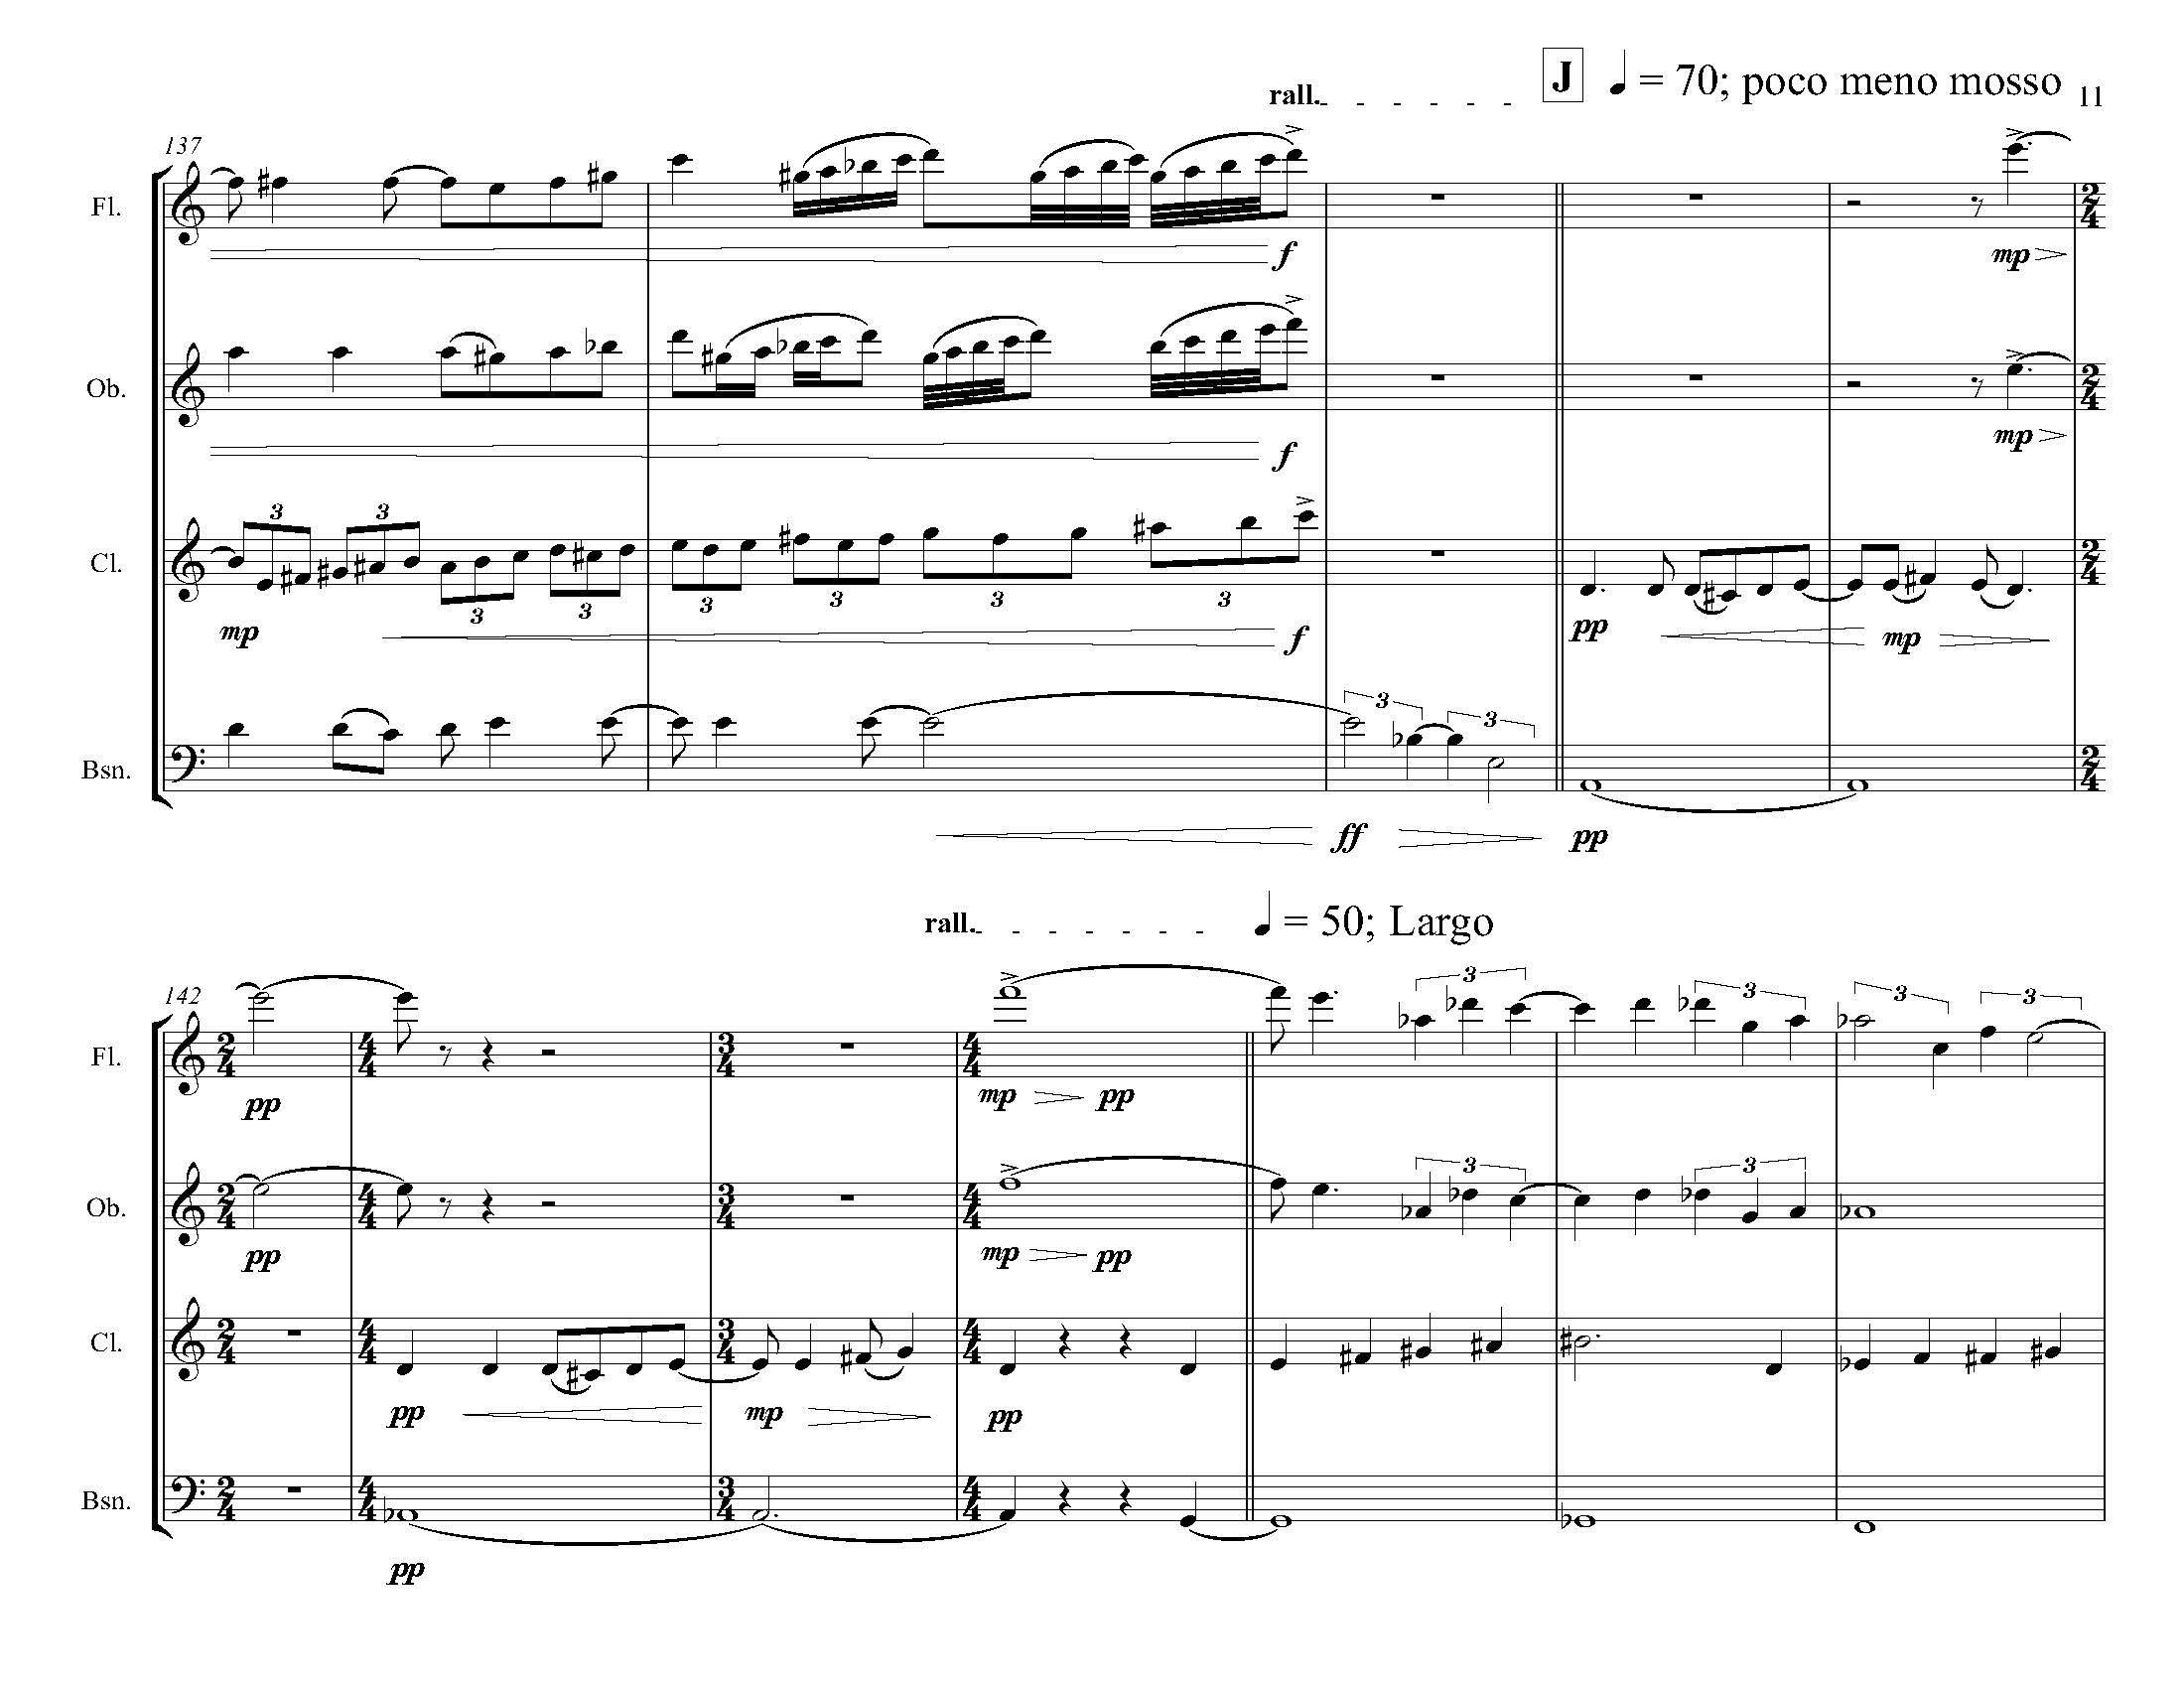 March the Twenty-Fifth - Complete Score_Page_17.jpg